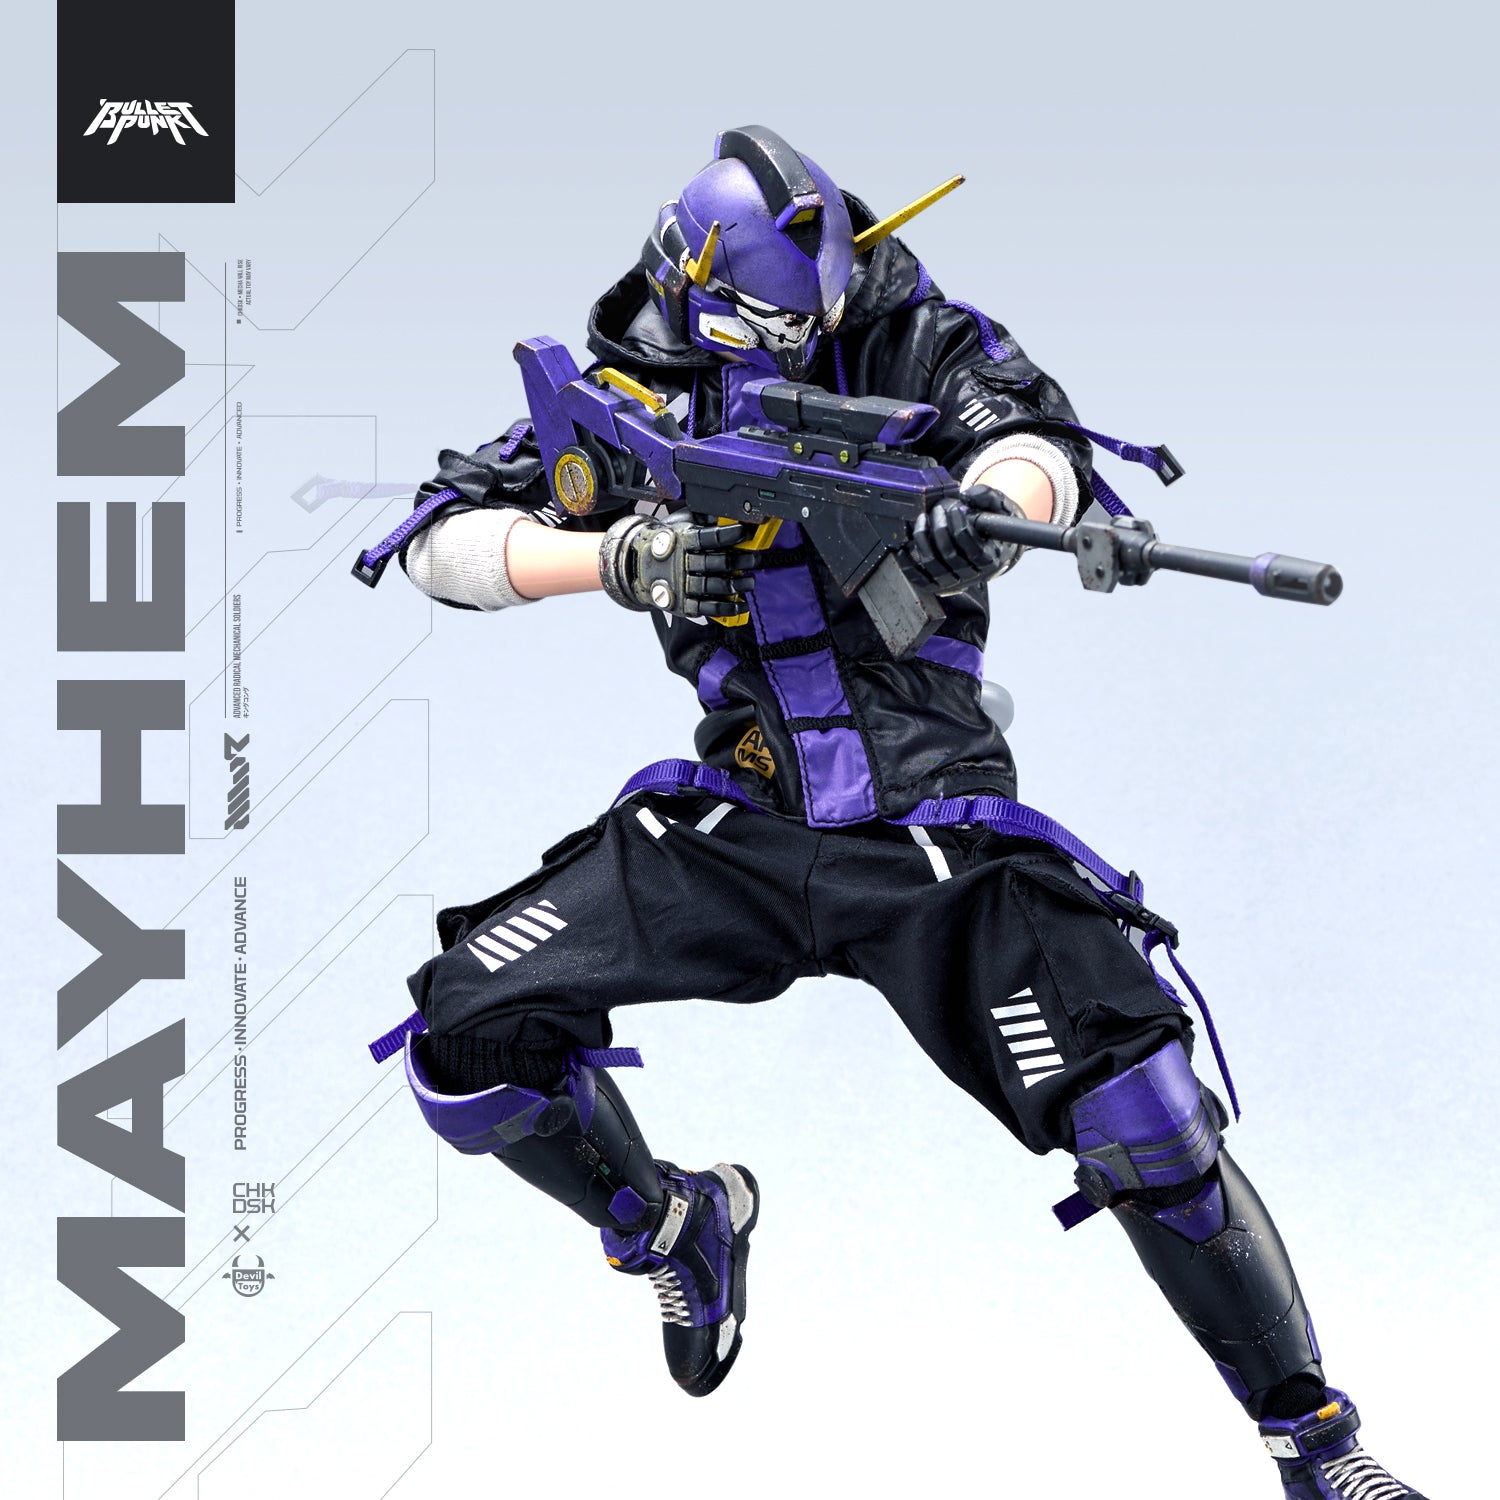 MWR MAYHEM The Reaper 1/6 scale action figure by Devil Toys x Chk Dsk x  Quiccs